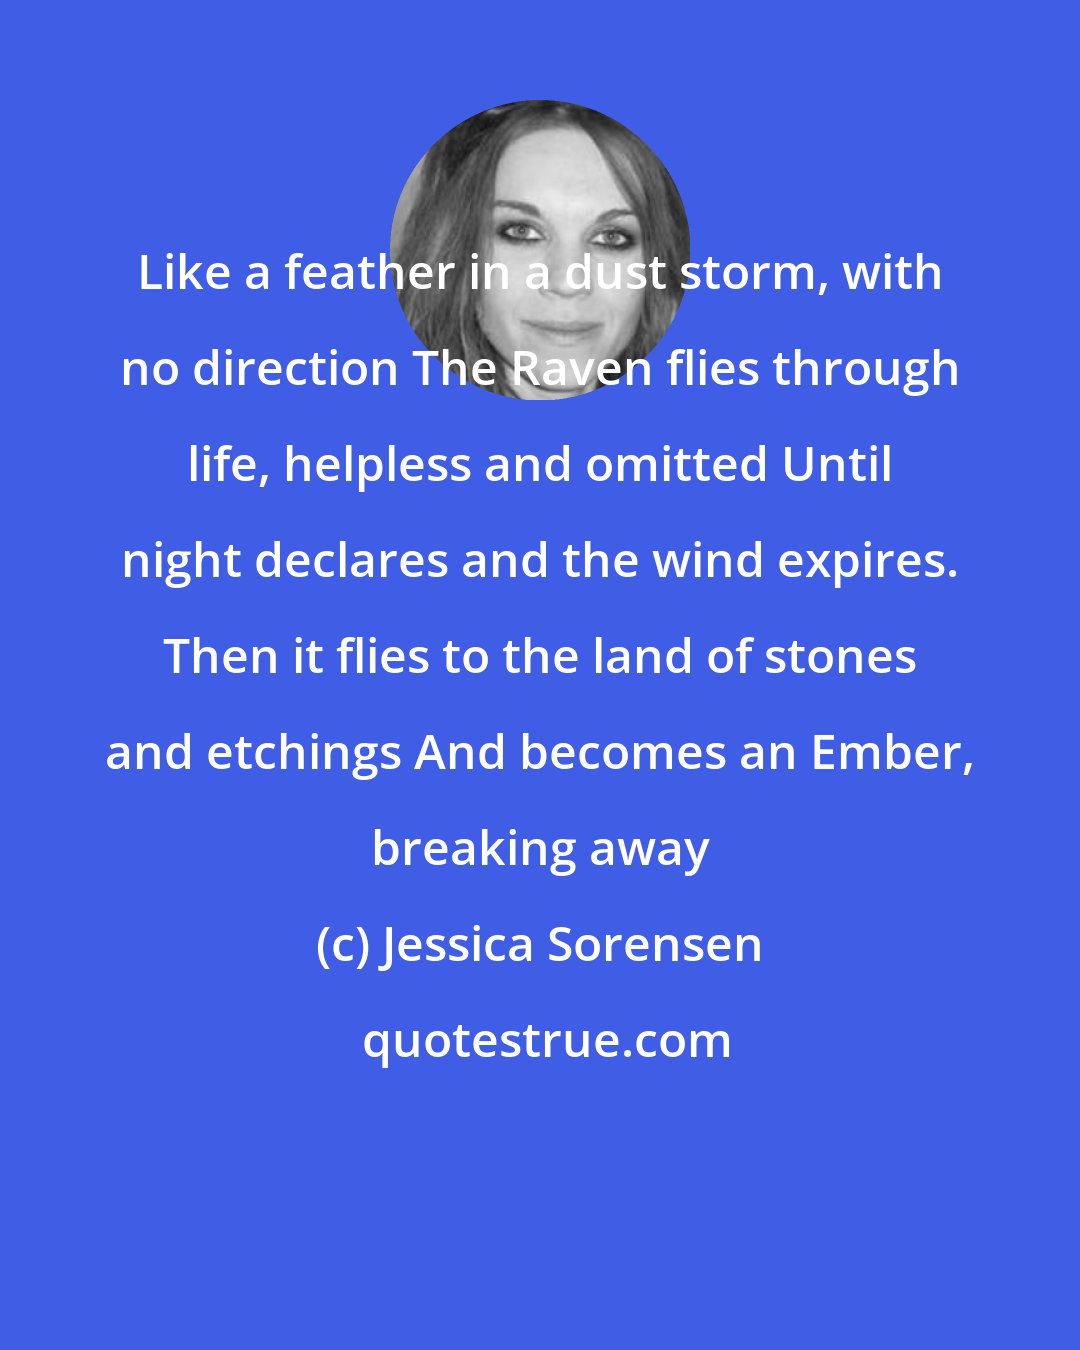 Jessica Sorensen: Like a feather in a dust storm, with no direction The Raven flies through life, helpless and omitted Until night declares and the wind expires. Then it flies to the land of stones and etchings And becomes an Ember, breaking away